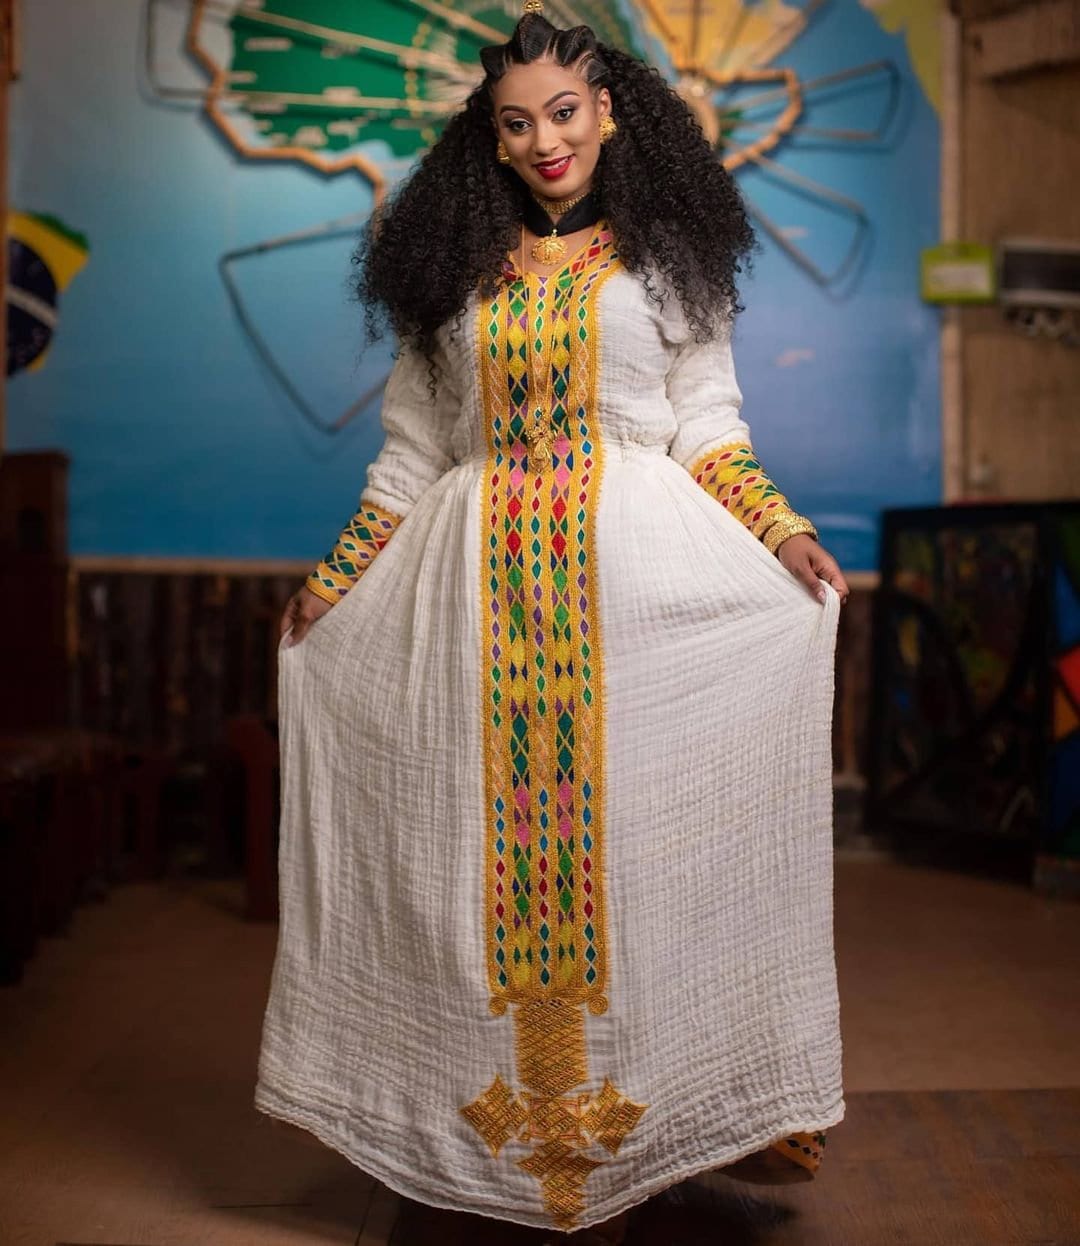 Exquisite Intricacy: Hand-Embroidered Axum Fetil - A Masterpiece of Traditional Habesha Dress Craftsmanship